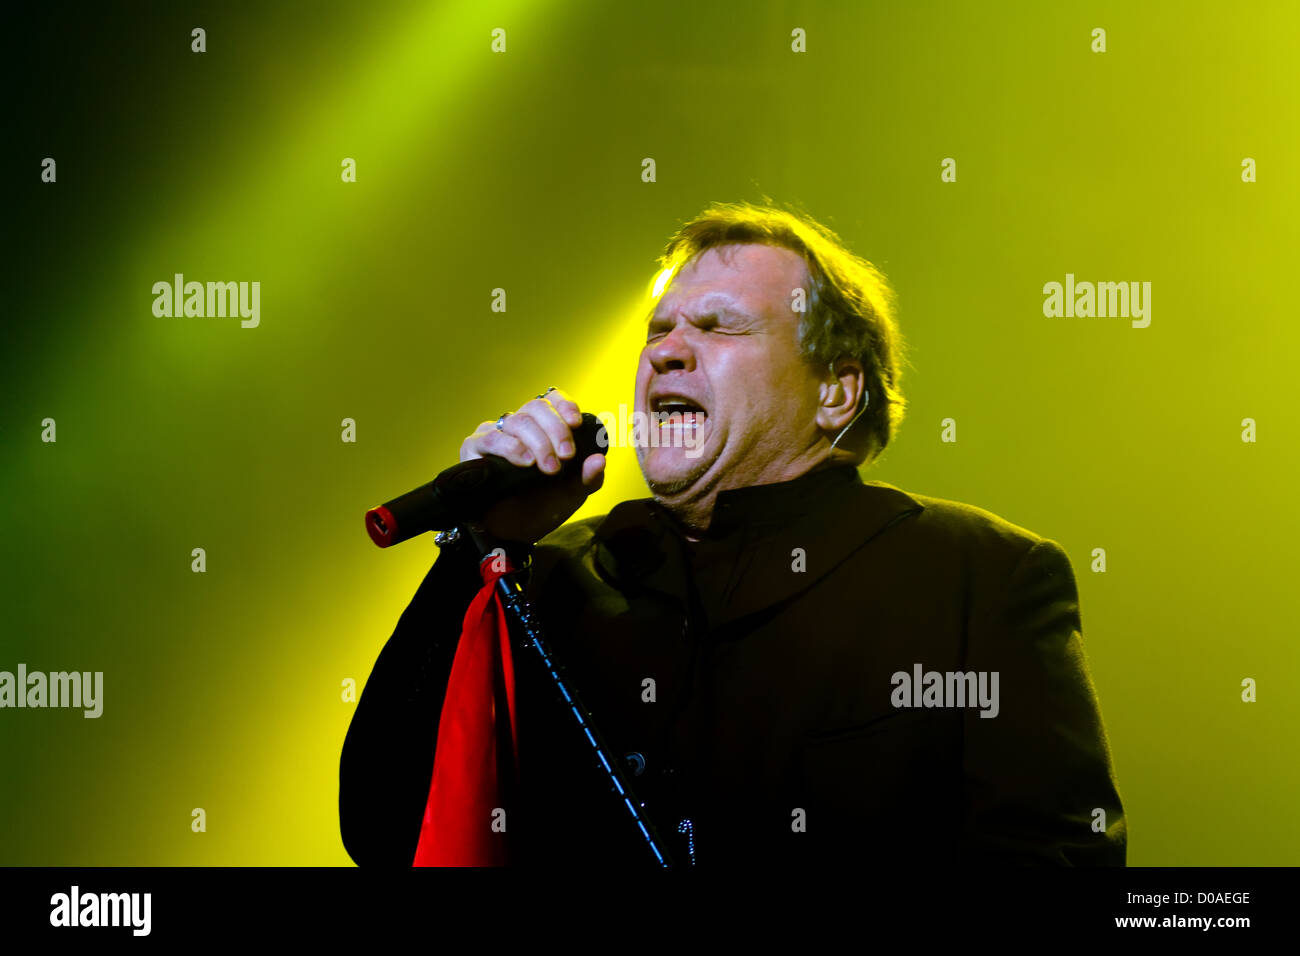 Meat Loaf performing live at Wembley Arena London, England Stock Photo